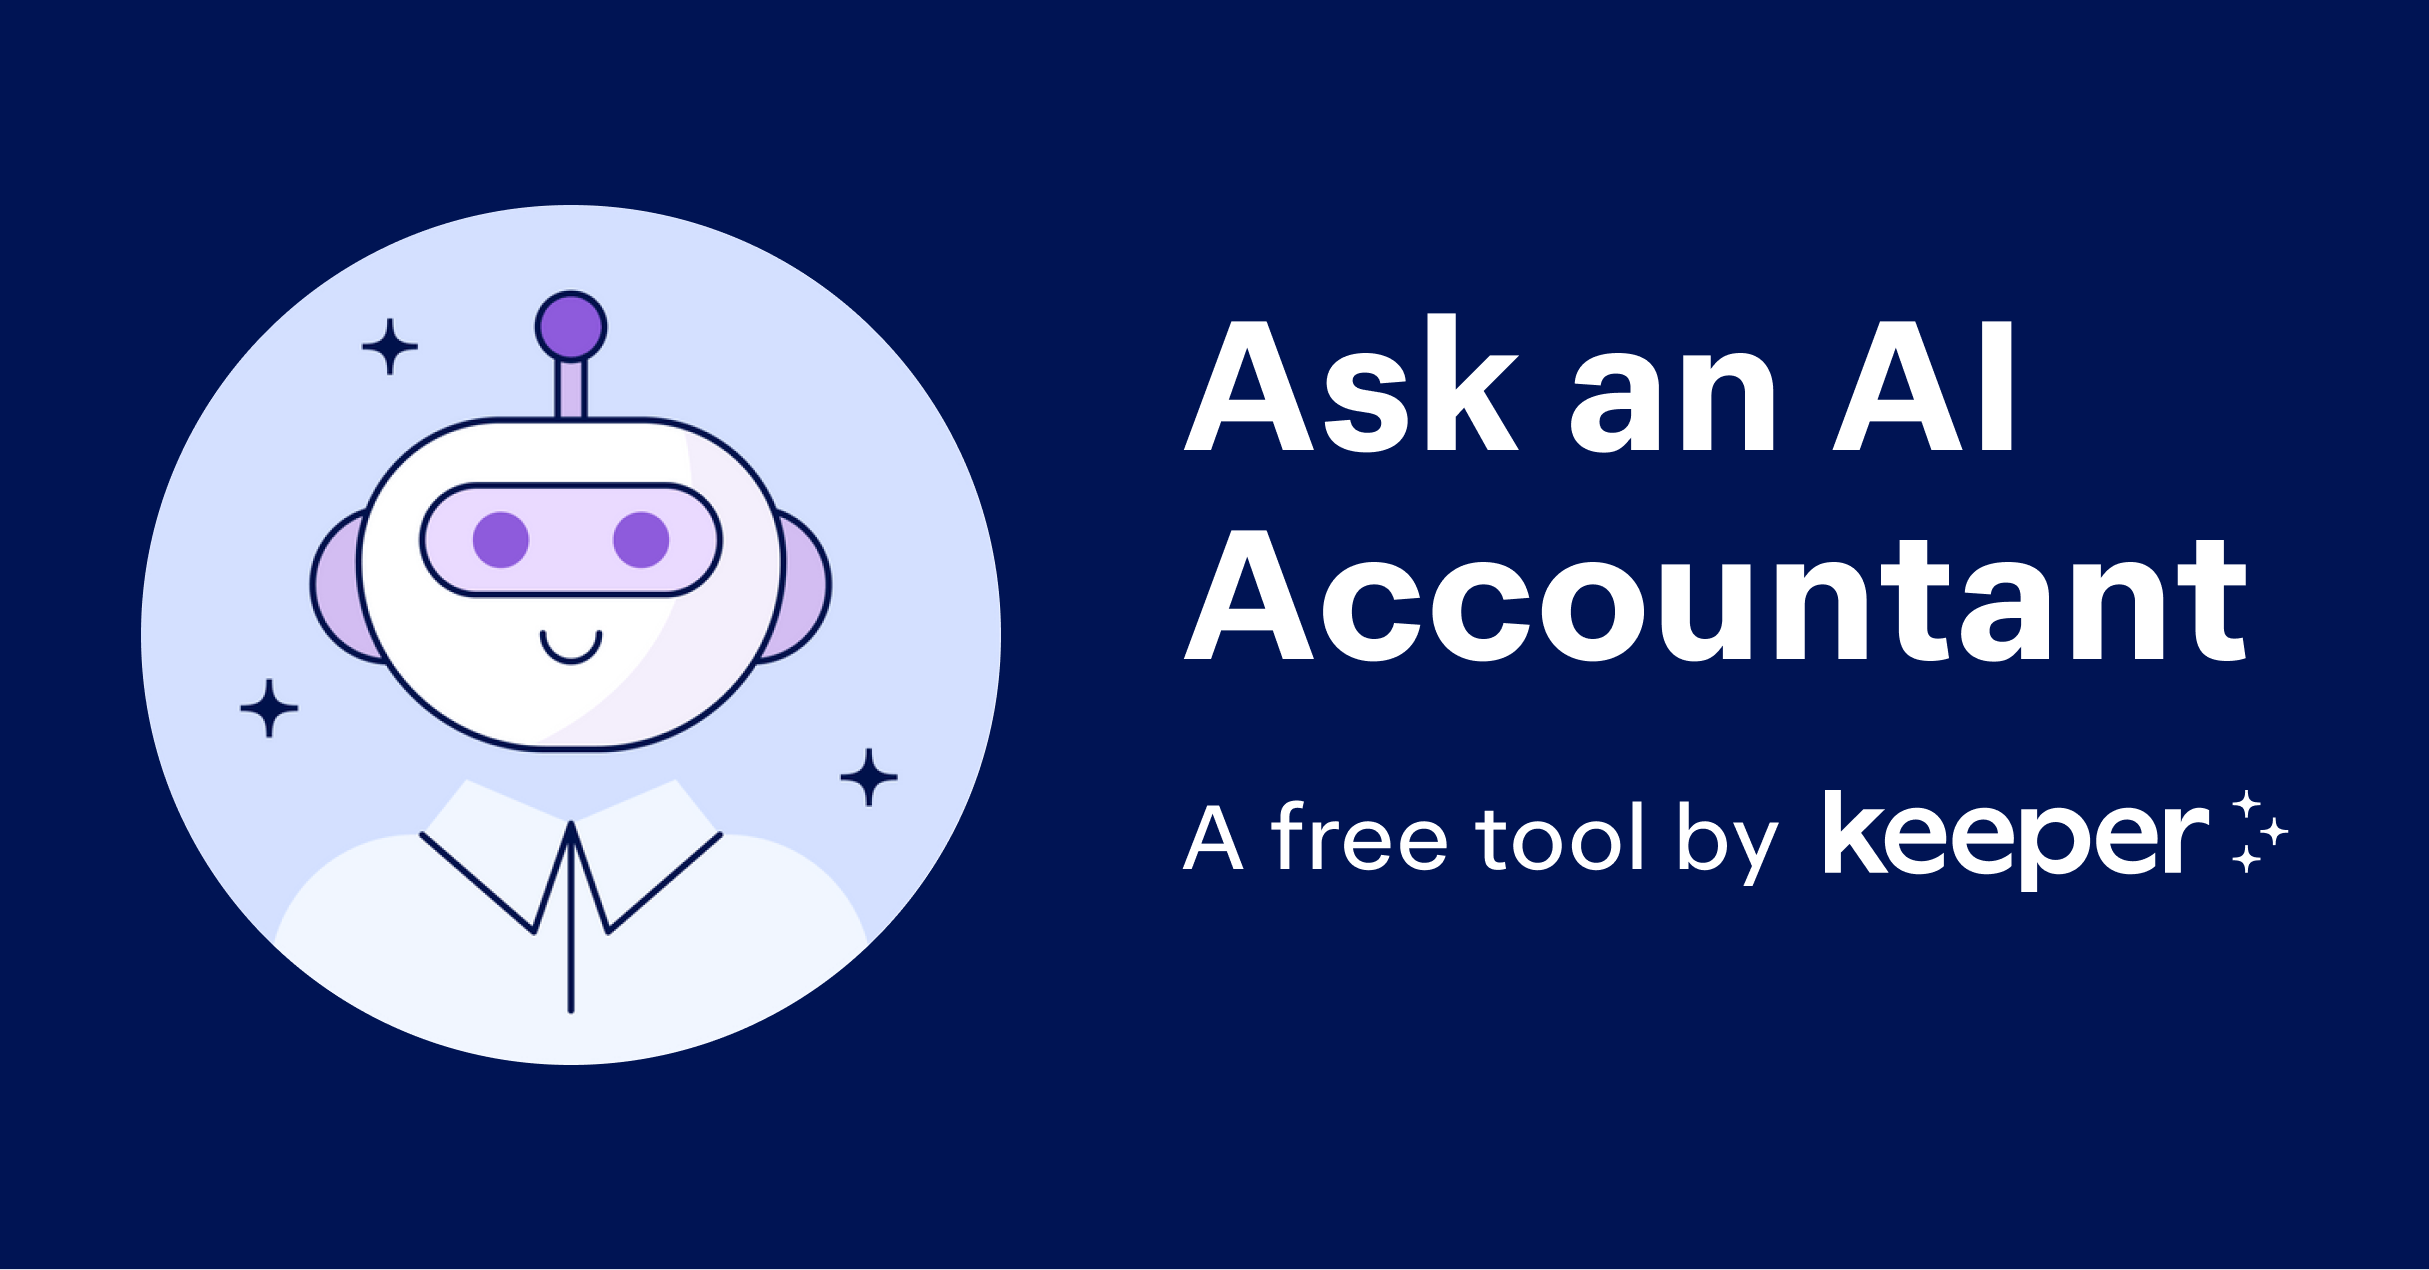 Ask an AI Accountant - A chatbot to answer tax-related questions